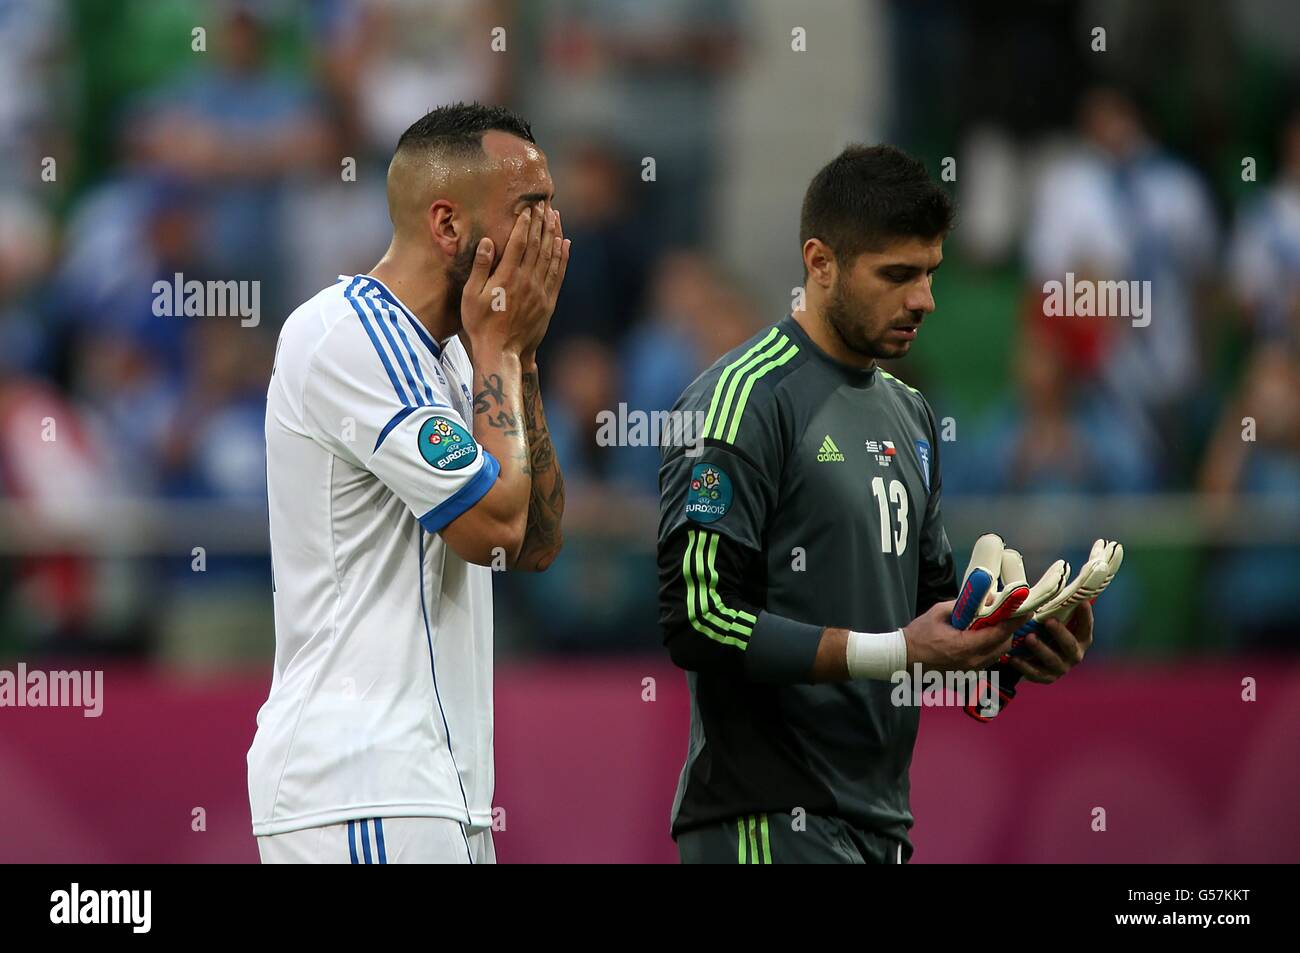 Soccer - UEFA Euro 2012 - Group A - Greece v Czech Republic - Municipal Stadium. Greece's Kostas Mitroglou (left) and goalkeeper Michail Sifakis appear dejected after the final whistle. Stock Photo